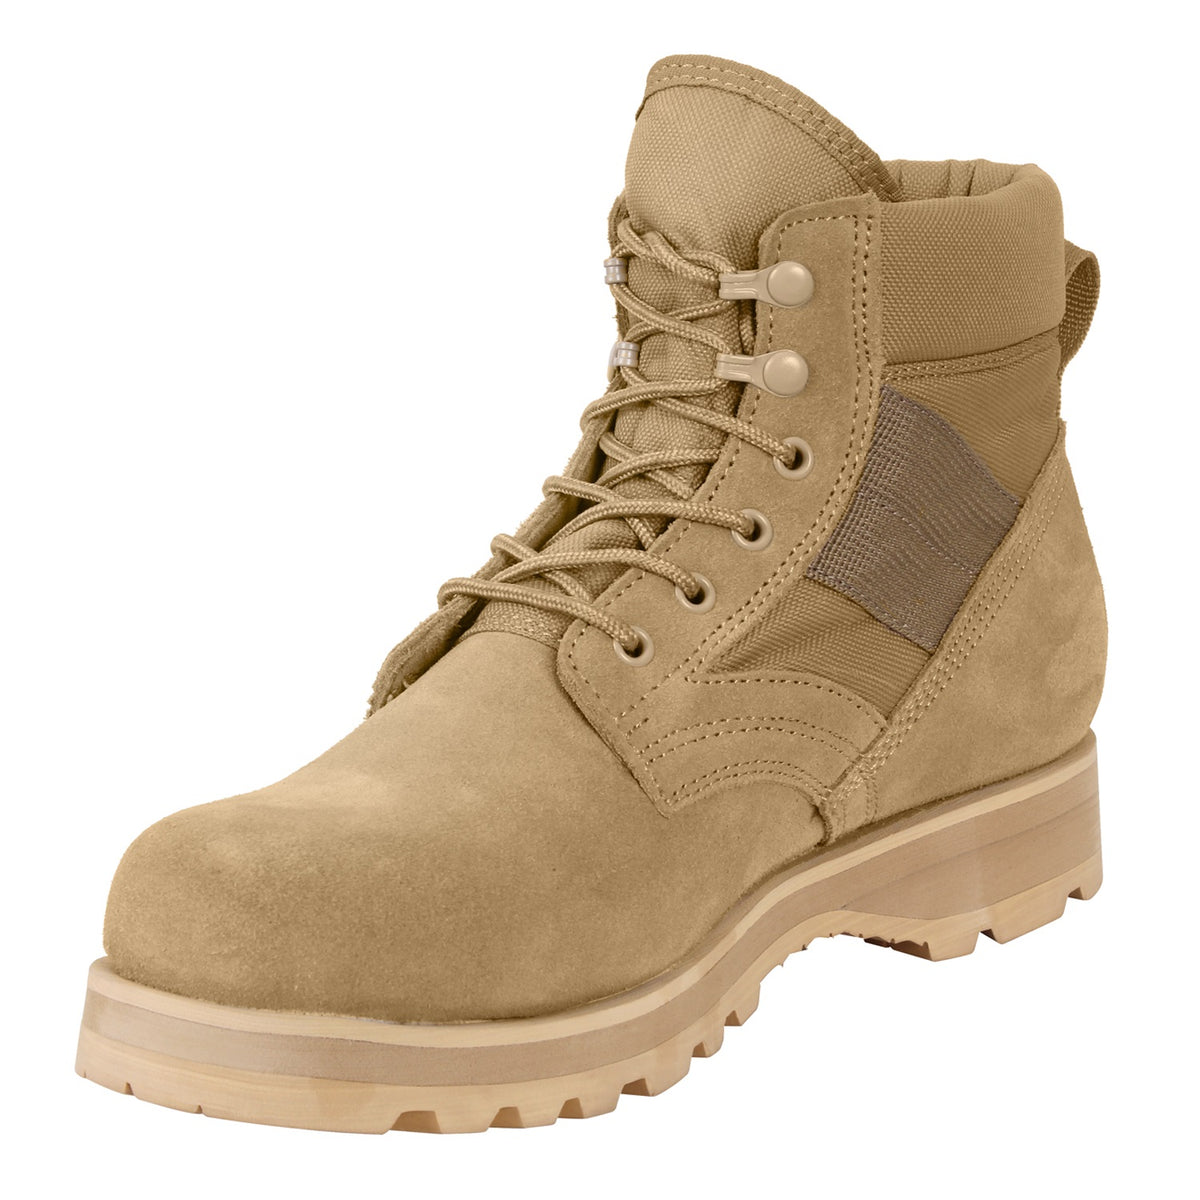 Rothco Military Combat Work Boots